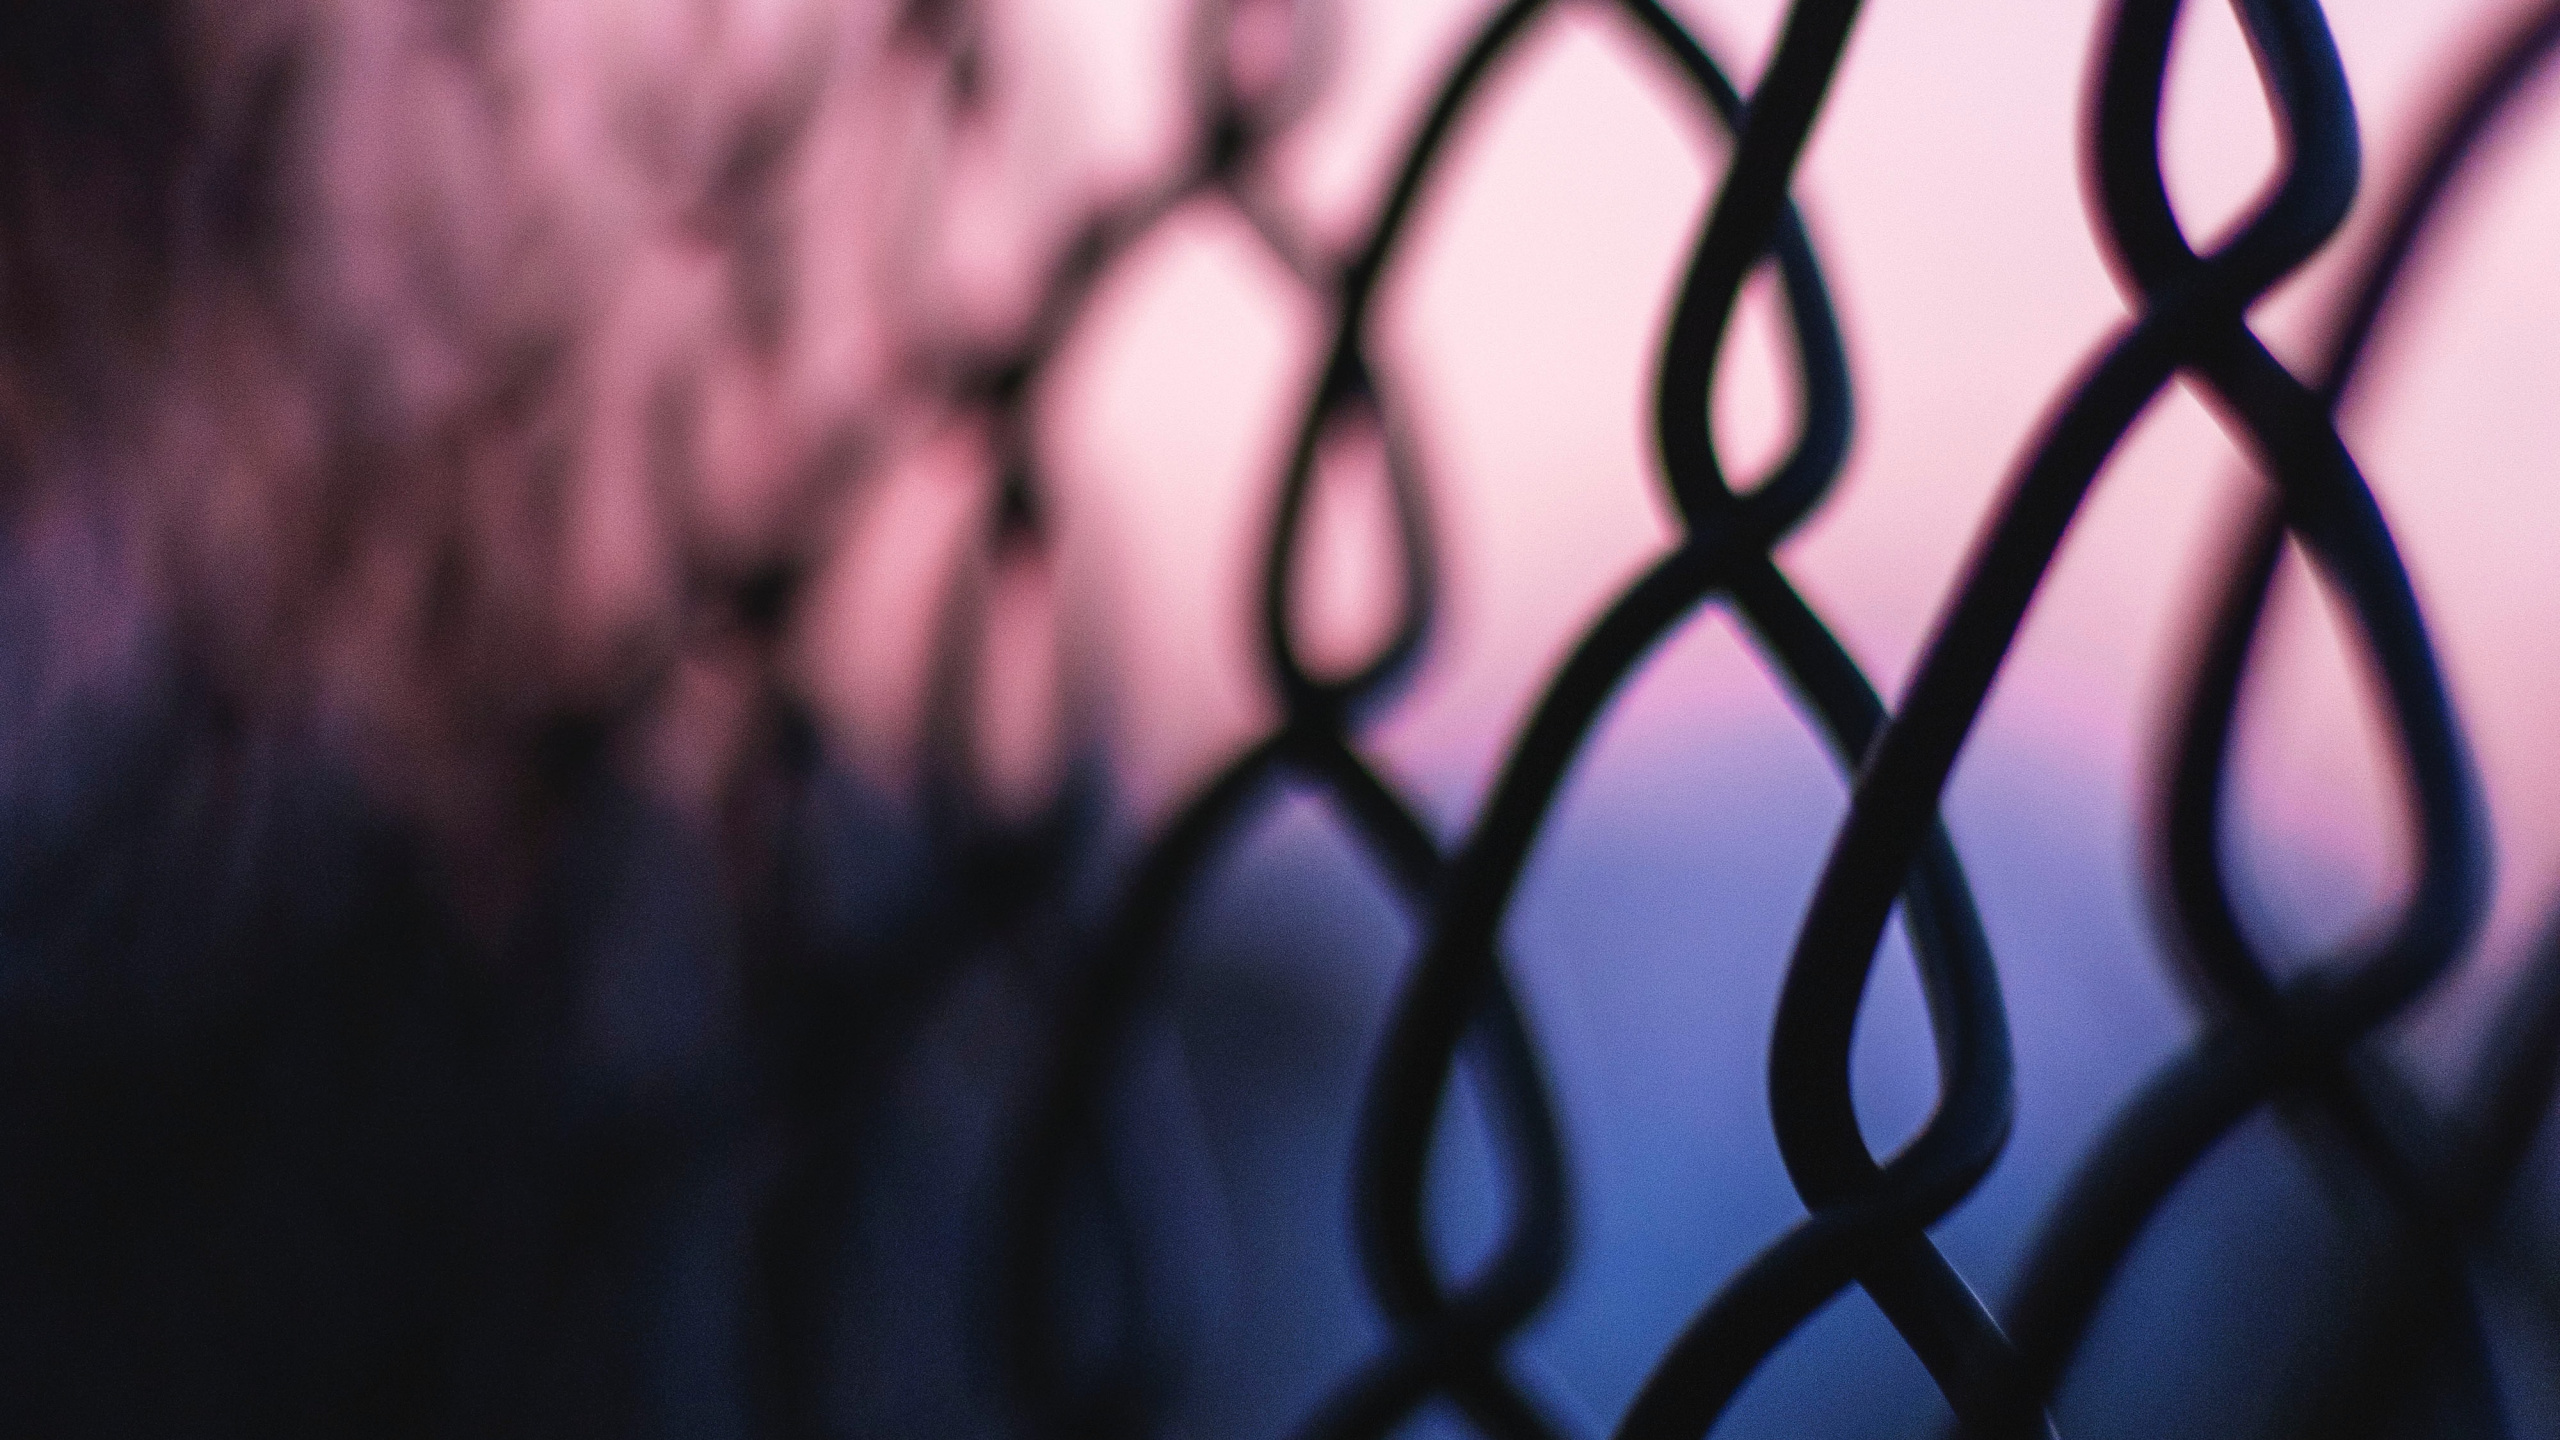 Grey Metal Fence During Daytime. Wallpaper in 2560x1440 Resolution